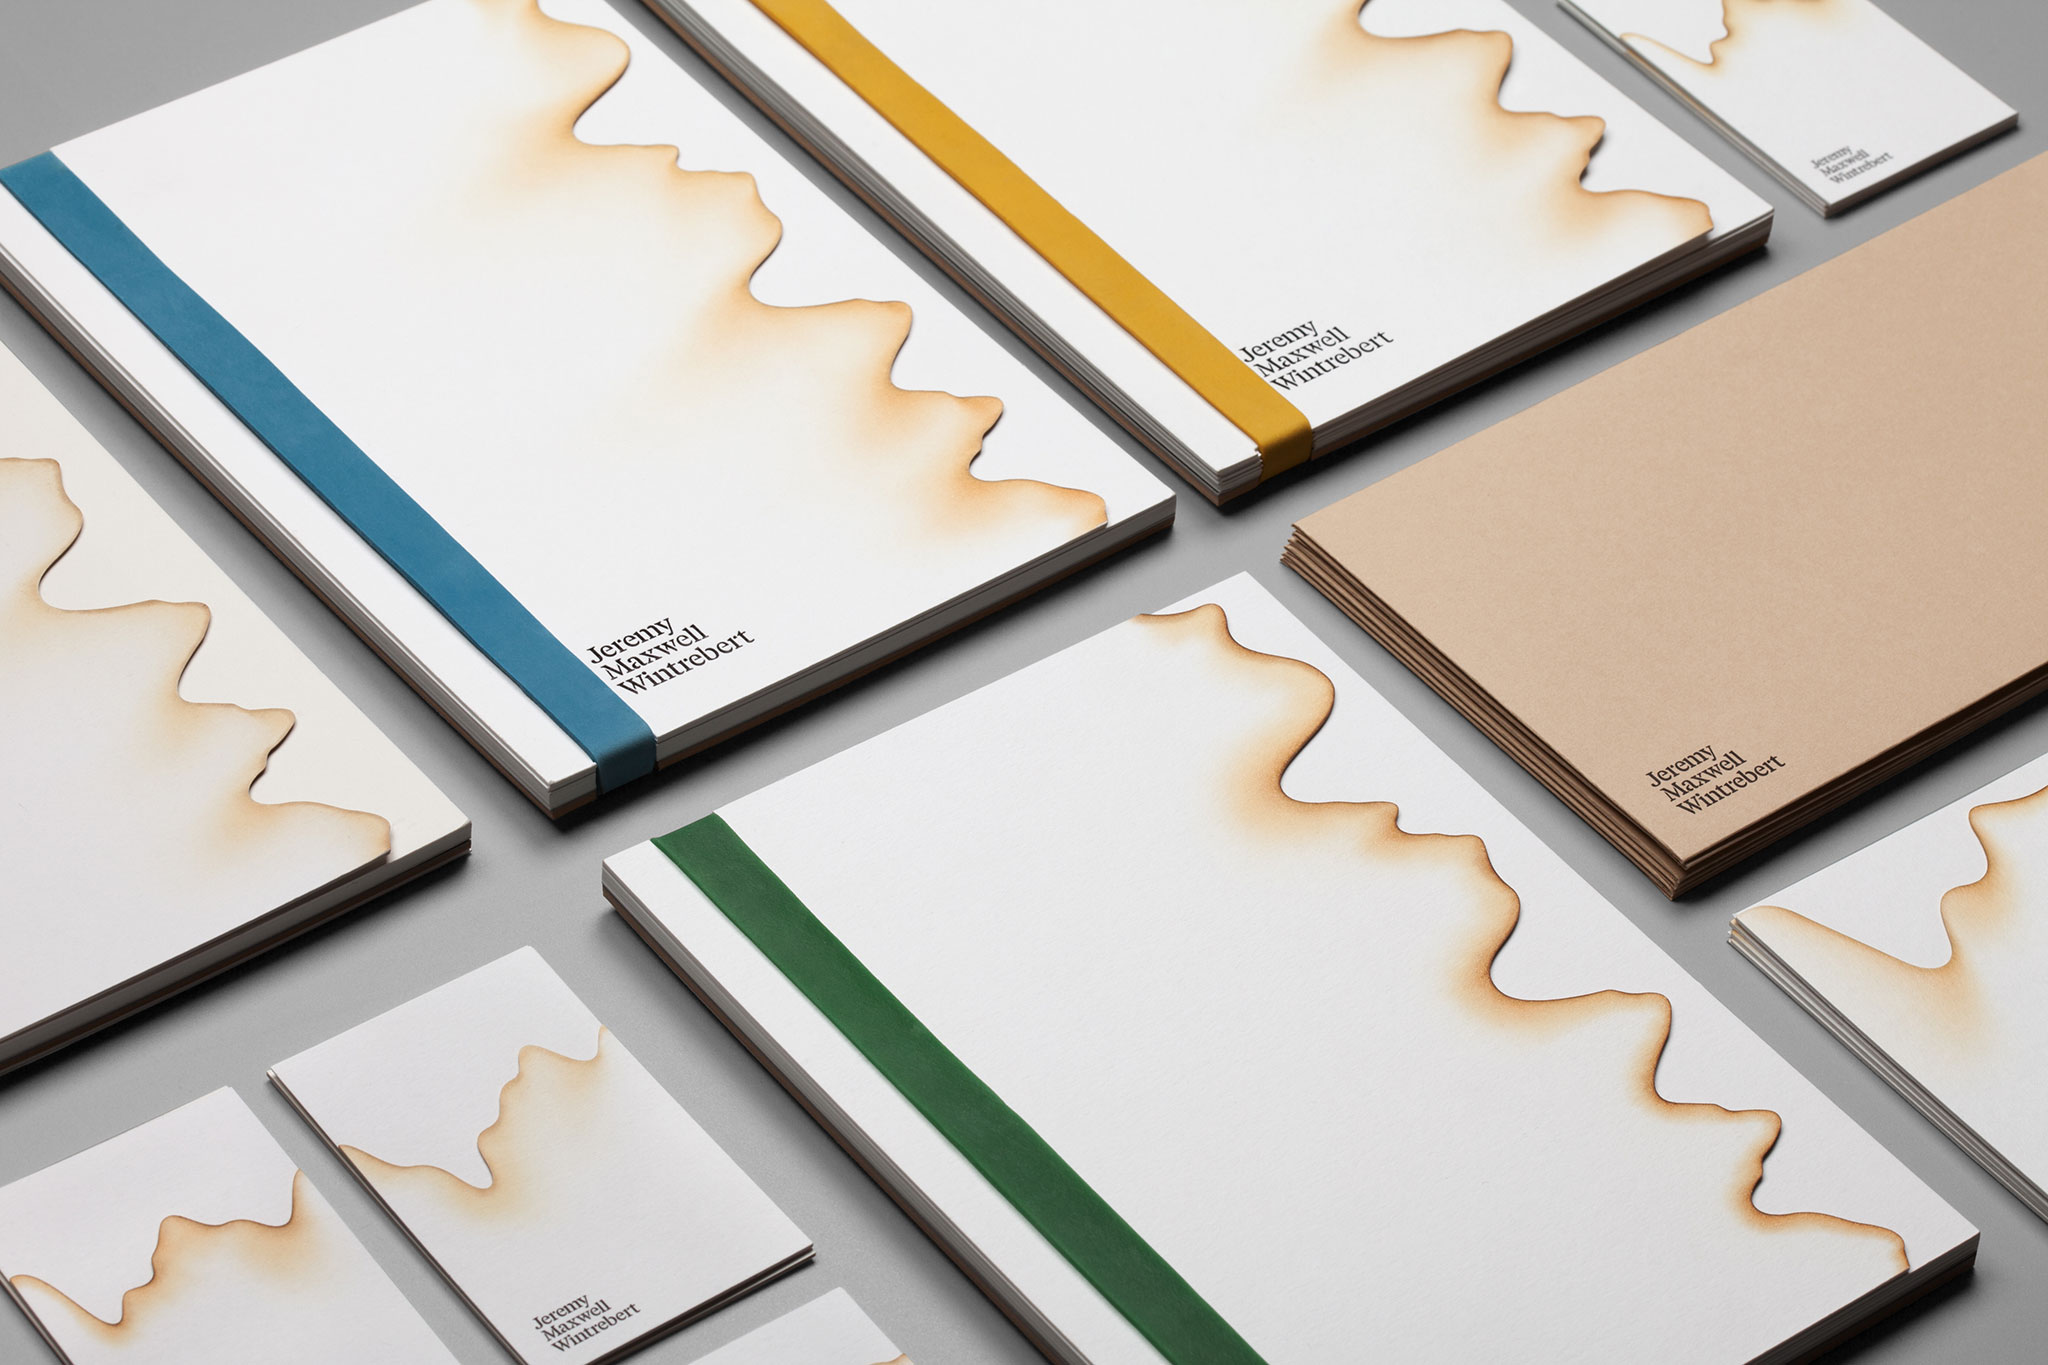 Portfolio and stationery designed by Hey for glassware maker Jeremy Maxwell Wintrebert